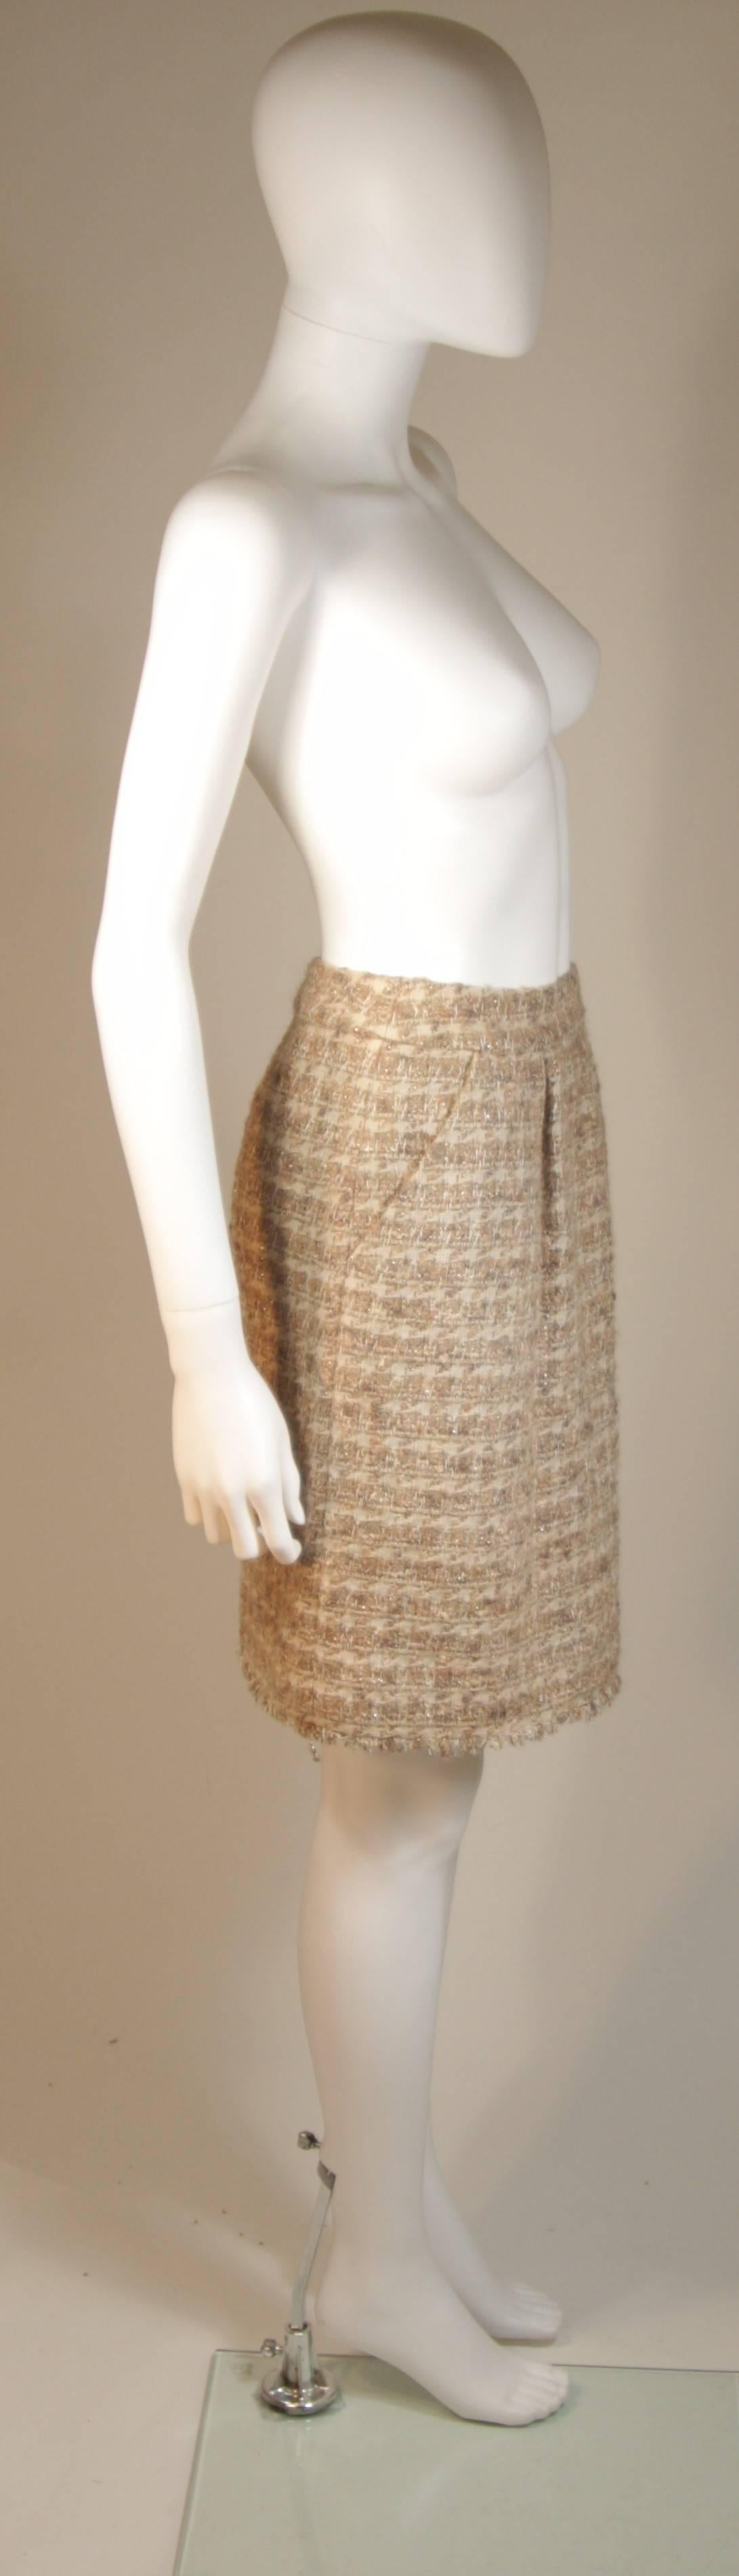 CHANEL Nude Tweed Knee Length Skirt with Brown Metallic Detail Size 6-8 2